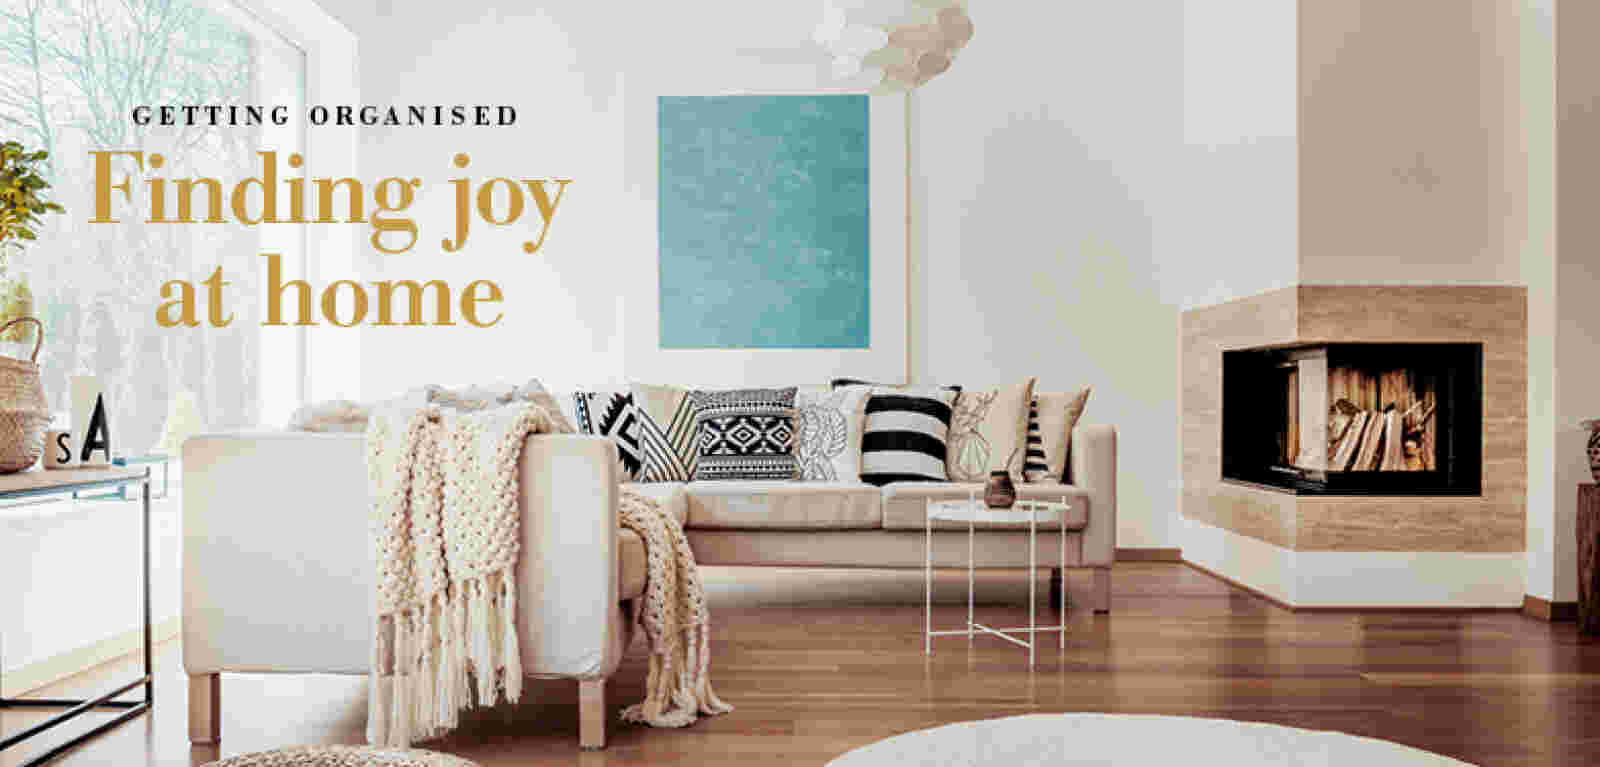 Finding joy at home - Simplify your home life